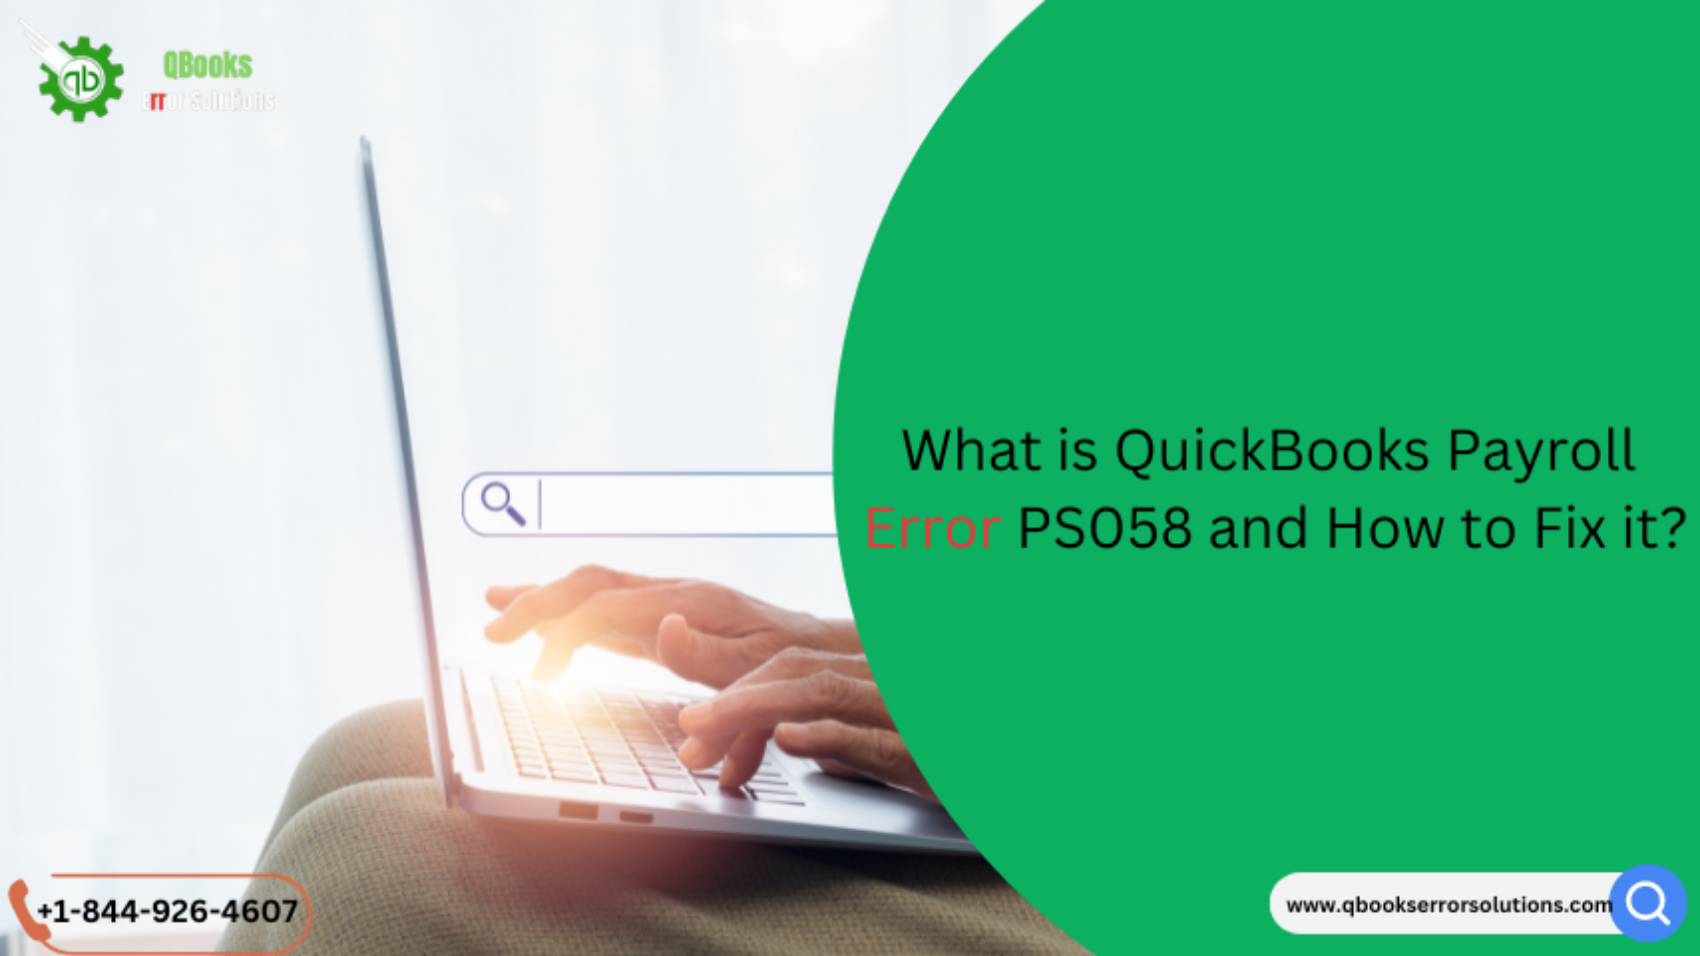 What is QuickBooks Payroll Error PS058 and How to Fix it